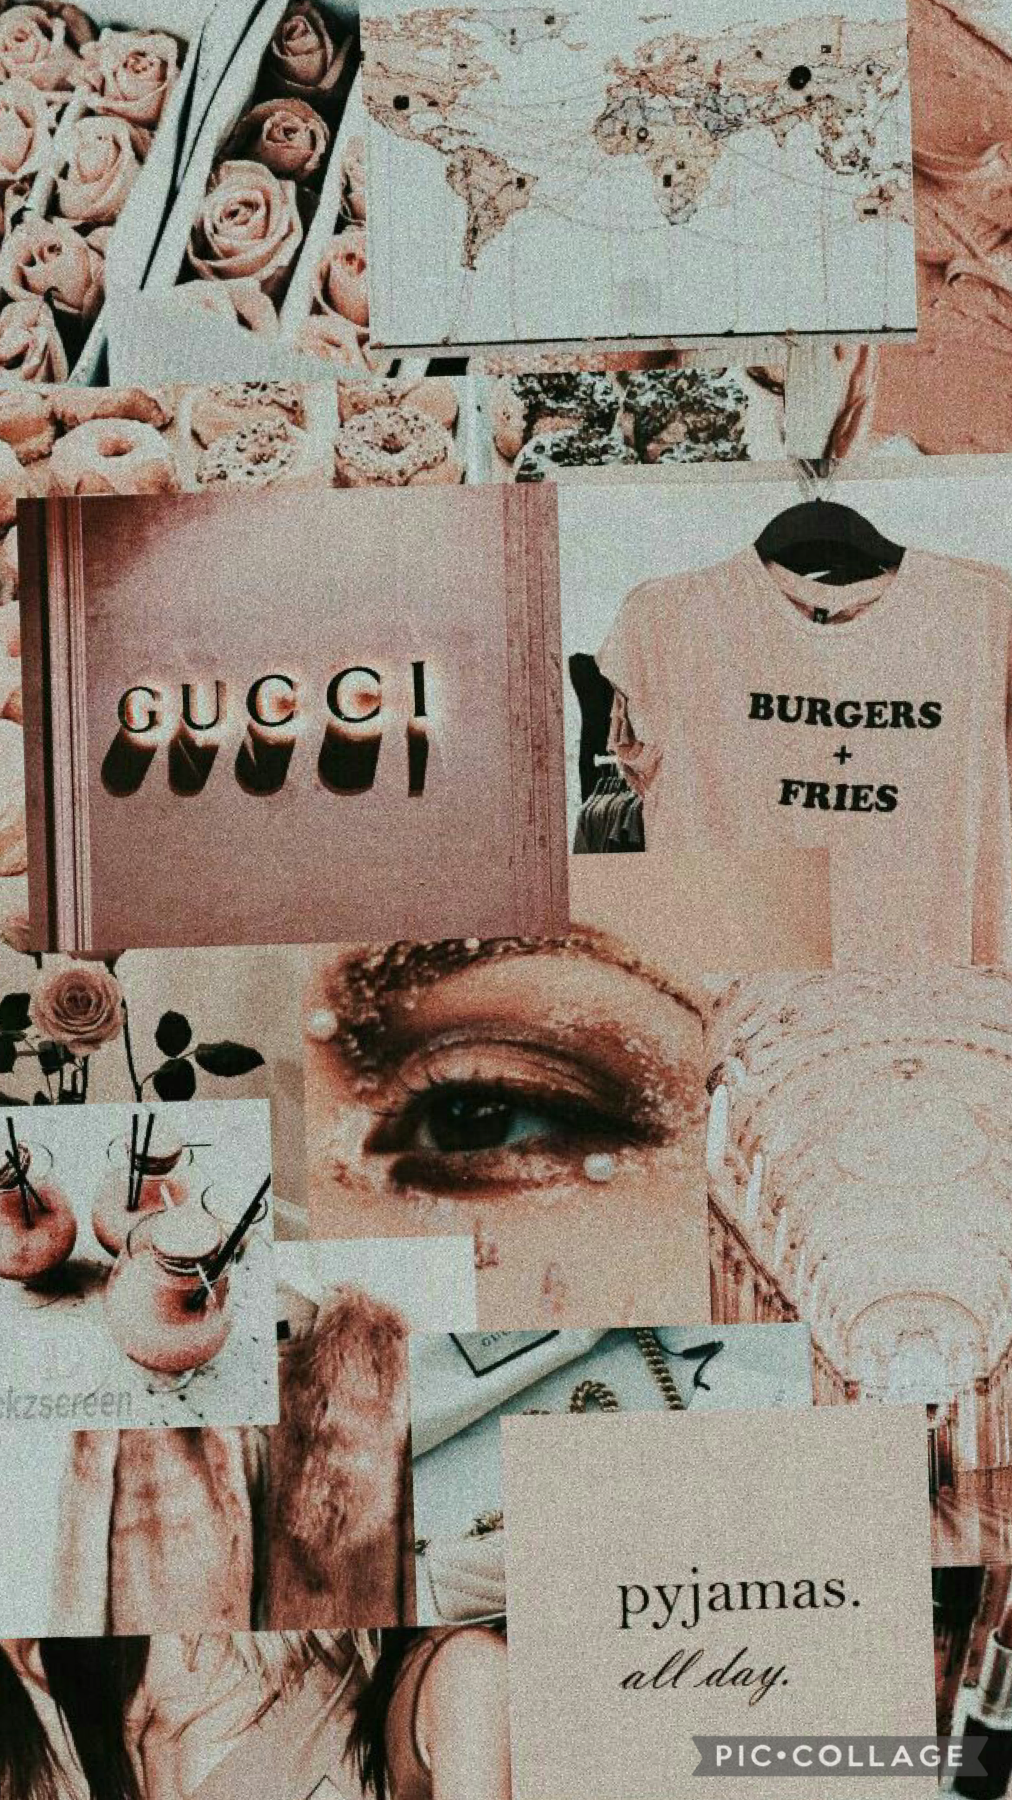 Collage by sugarvibes